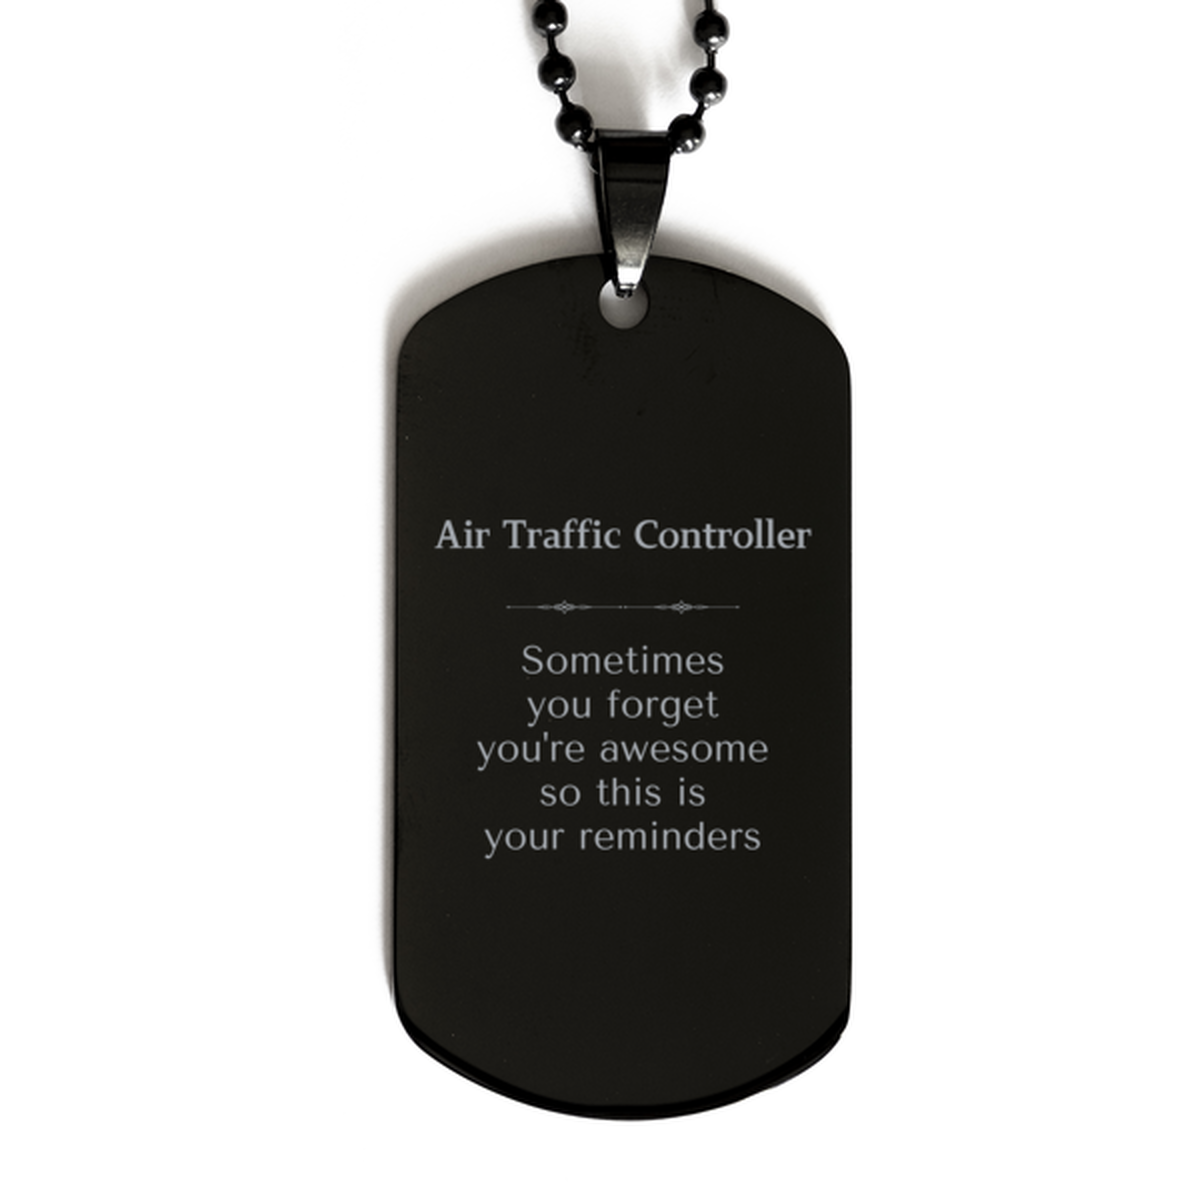 Sentimental Air Traffic Controller Black Dog Tag, Air Traffic Controller Sometimes you forget you're awesome so this is your reminders, Graduation Christmas Birthday Gifts for Air Traffic Controller, Men, Women, Coworkers